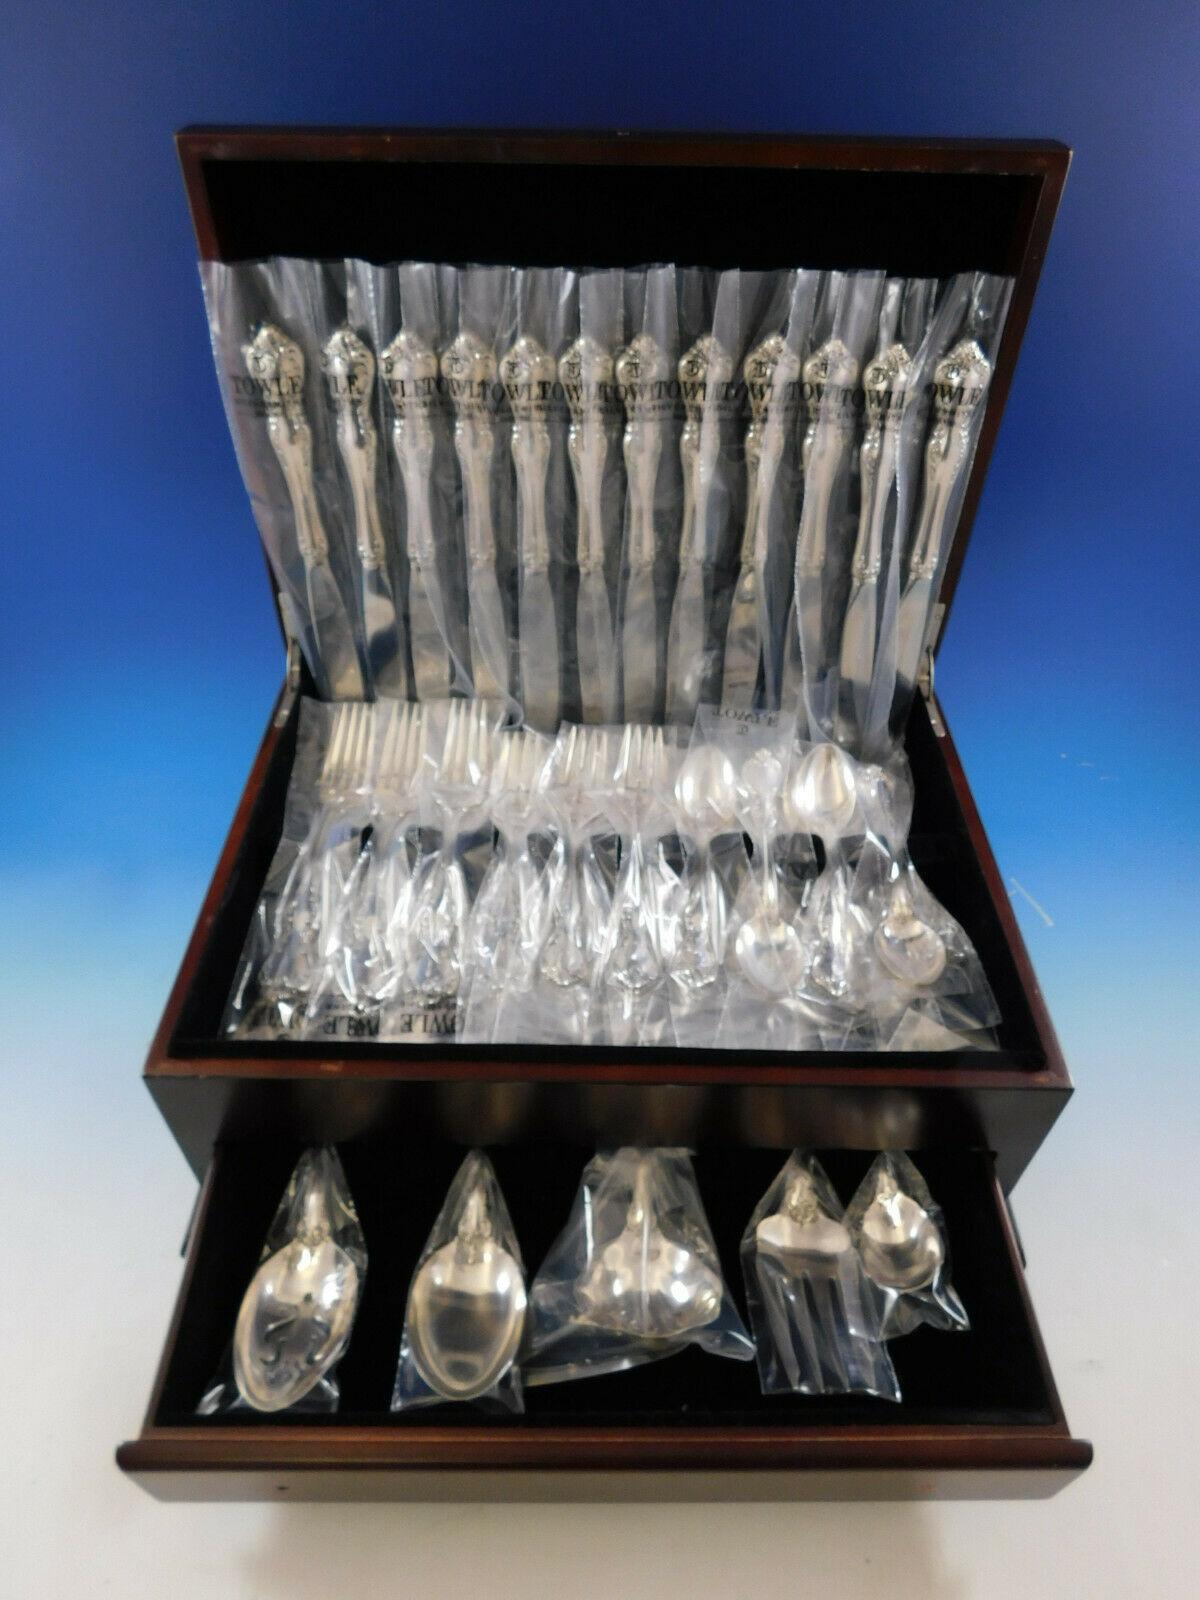 New, unused dinner size debussy by Towle sterling silver flatware set, 53 pieces. This set includes:

12 dinner knives, 9 1/2